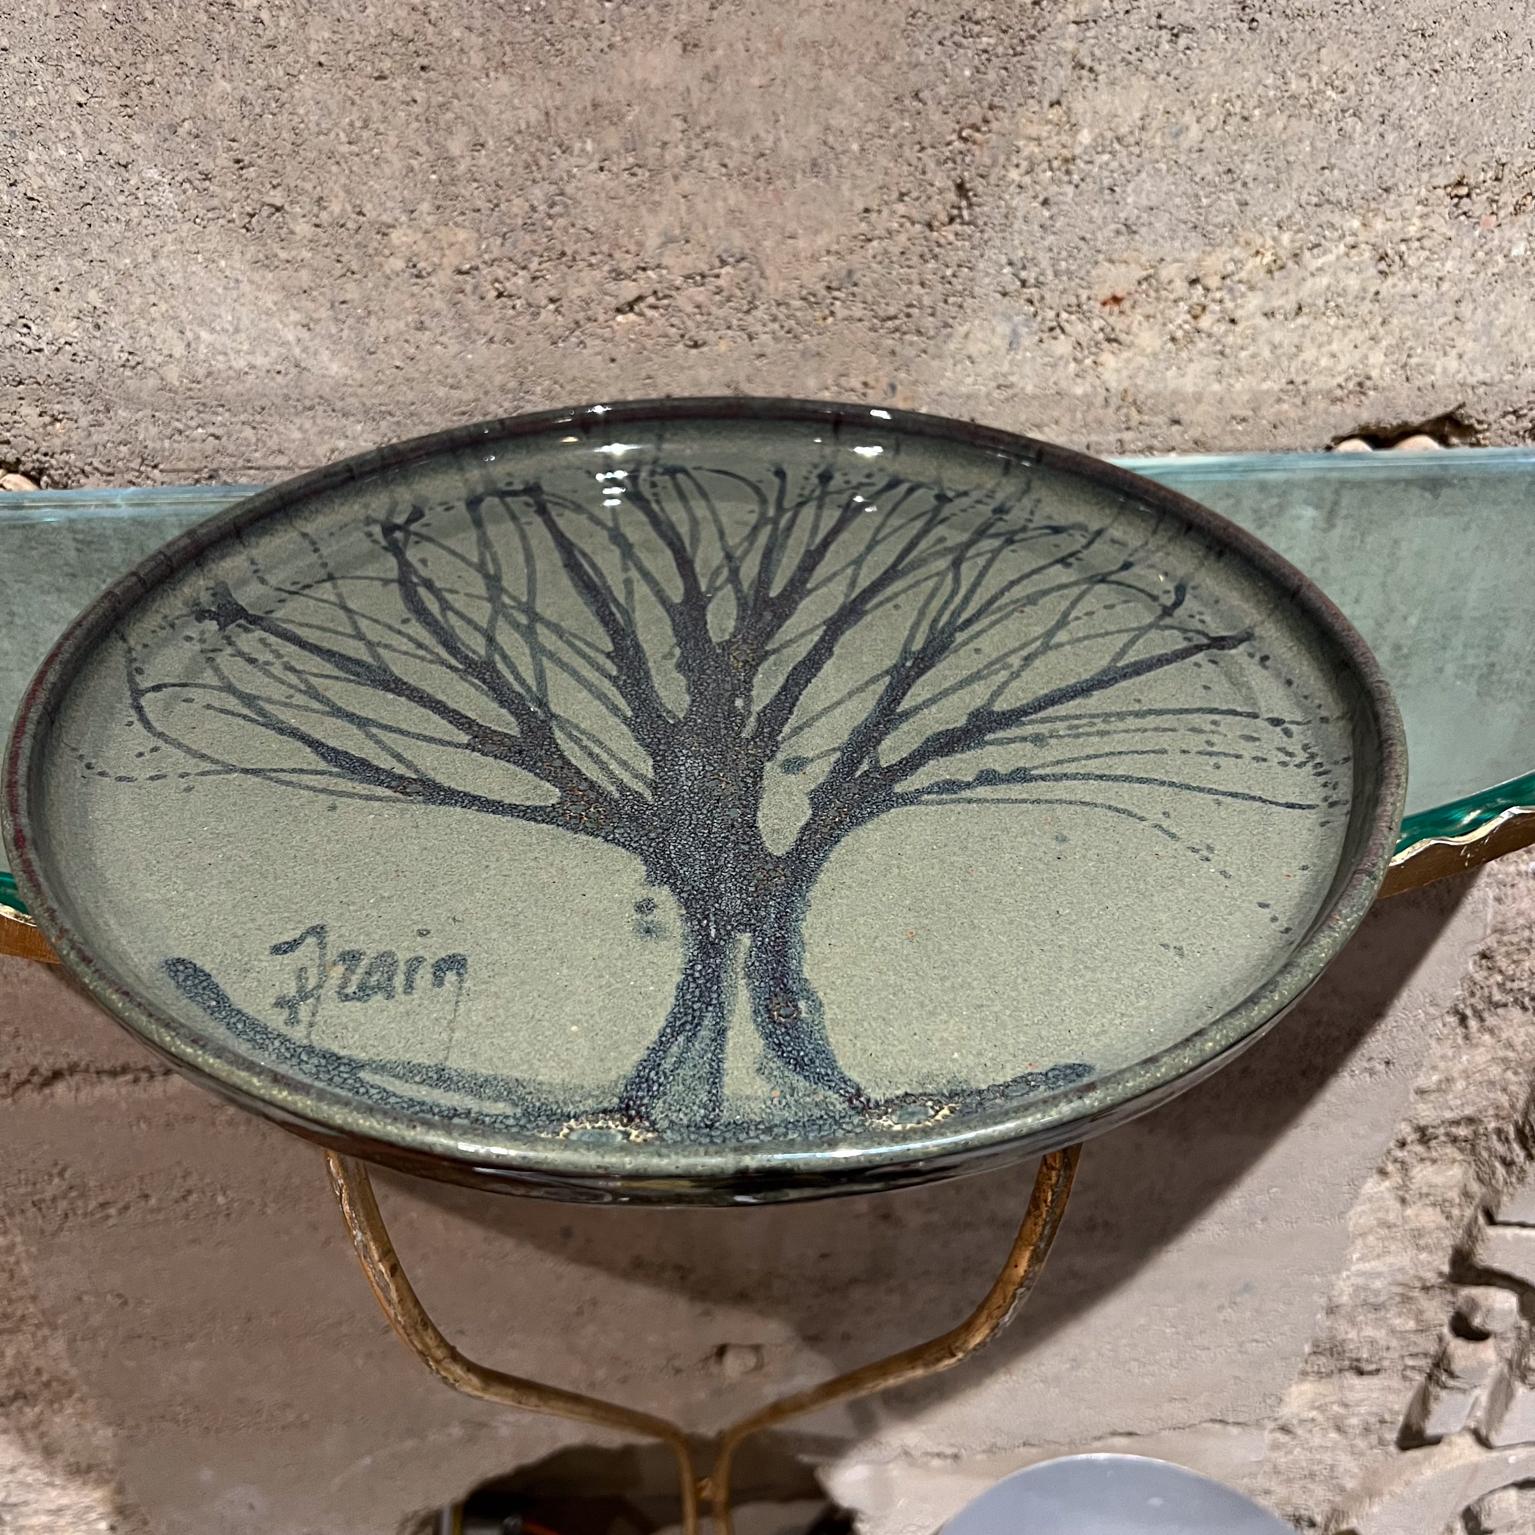 Abstract Tree of Life Studio Art Plate hand thrown pottery
13.5 diameter x 1 d
signed, T Frain Tim Frain
Preowned vintage unrestored condition, please see images provided.